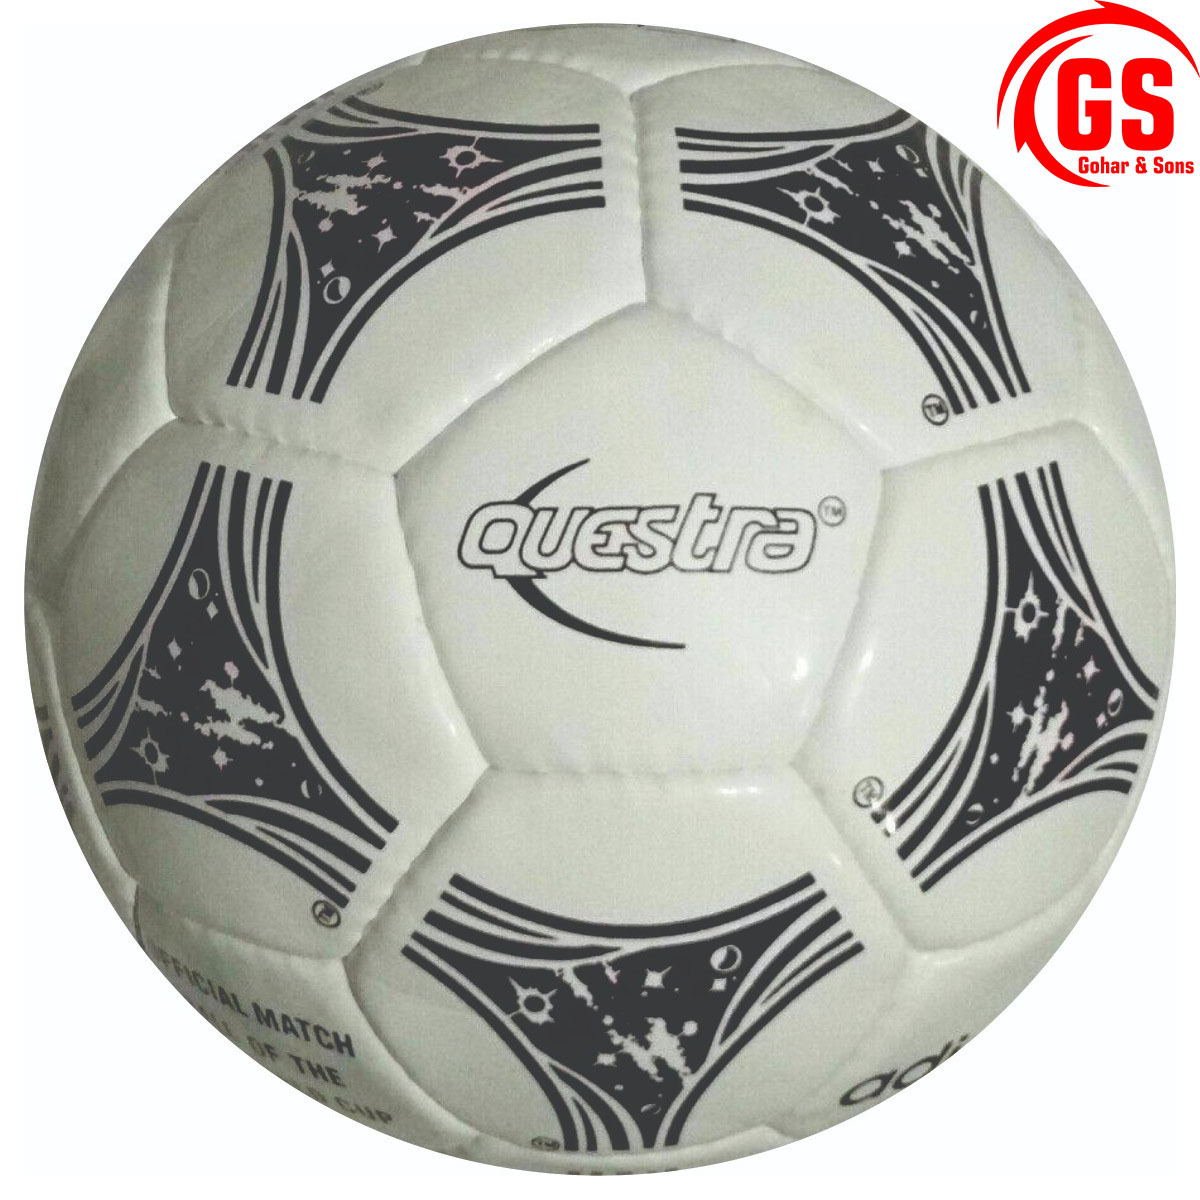 Adidas Tricolore Equipment Soccer Ball - FIFA World Cup 1998 Match Ball  Size 5